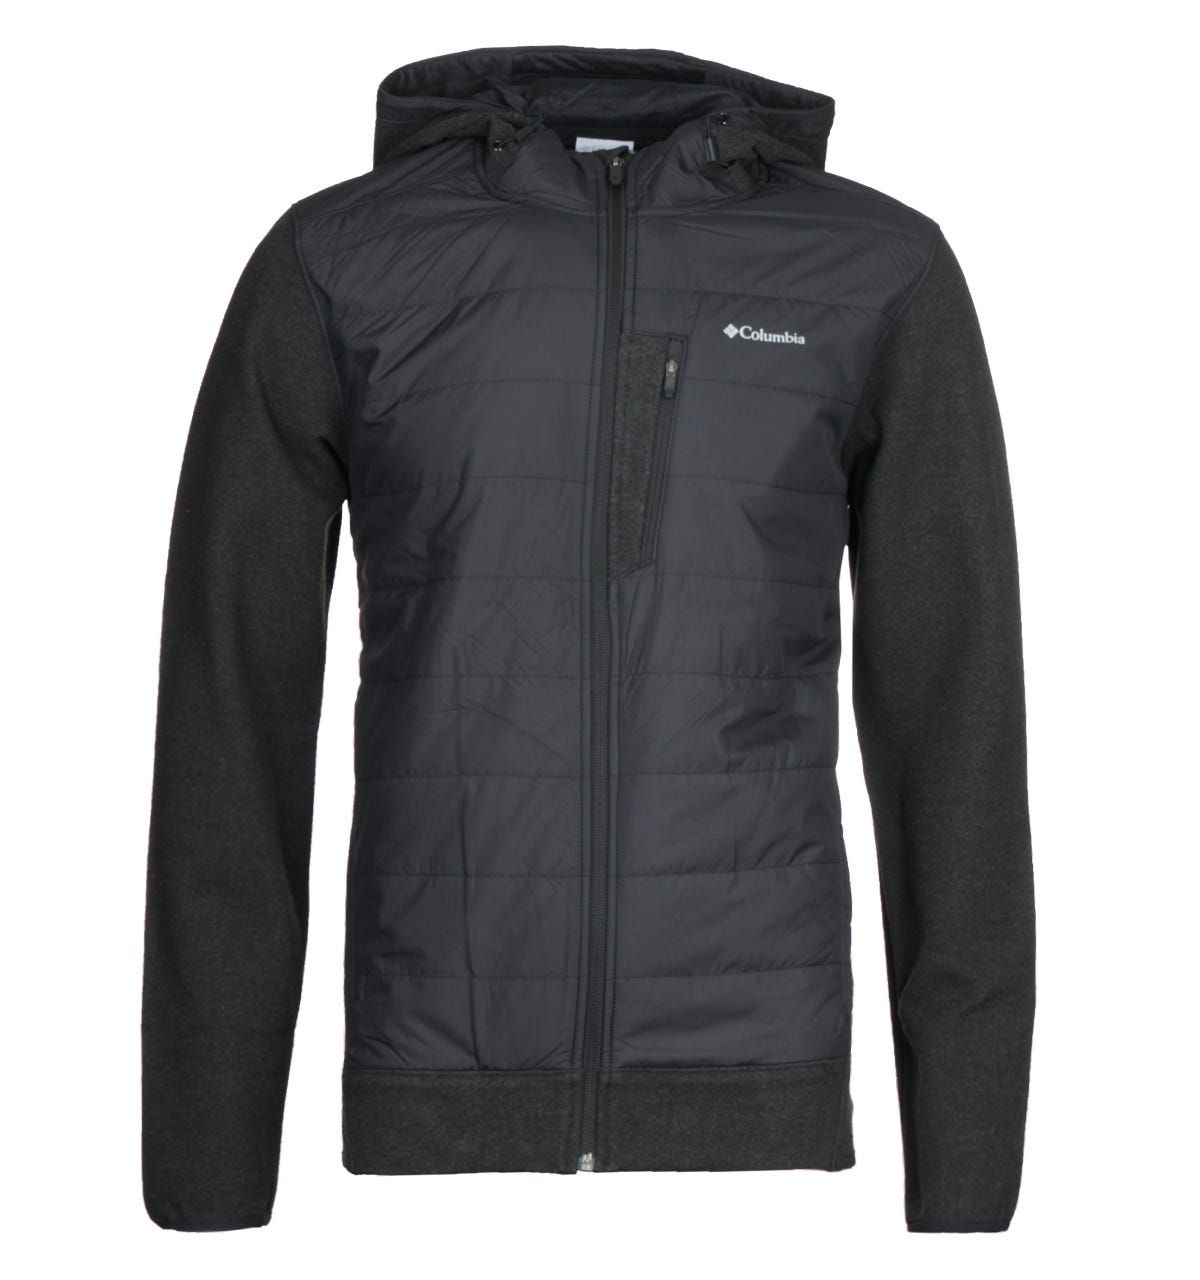 <p>A seasonal essential, crafted by Columbia. The Columbia Panorama Black Hoodie is a waterproof jacket that features an adjustable drawcord hood and a full zip fastening. The design is finished with the Columbia logo printed on the chest.</p><ul><li>Polyester composition</li><li>Full zip fastening</li><li>Drawcord hood</li><li>Waterproof</li><li>Columbia logo printed on chest</li></ul><p>Style & Fit:</p><ul><li>Regular fit</li><li>Fits true to size</li></ul><p>Fabric Composition & Care:</p><ul><li>100% Polyester</li><li>Machine wash</li></ul>